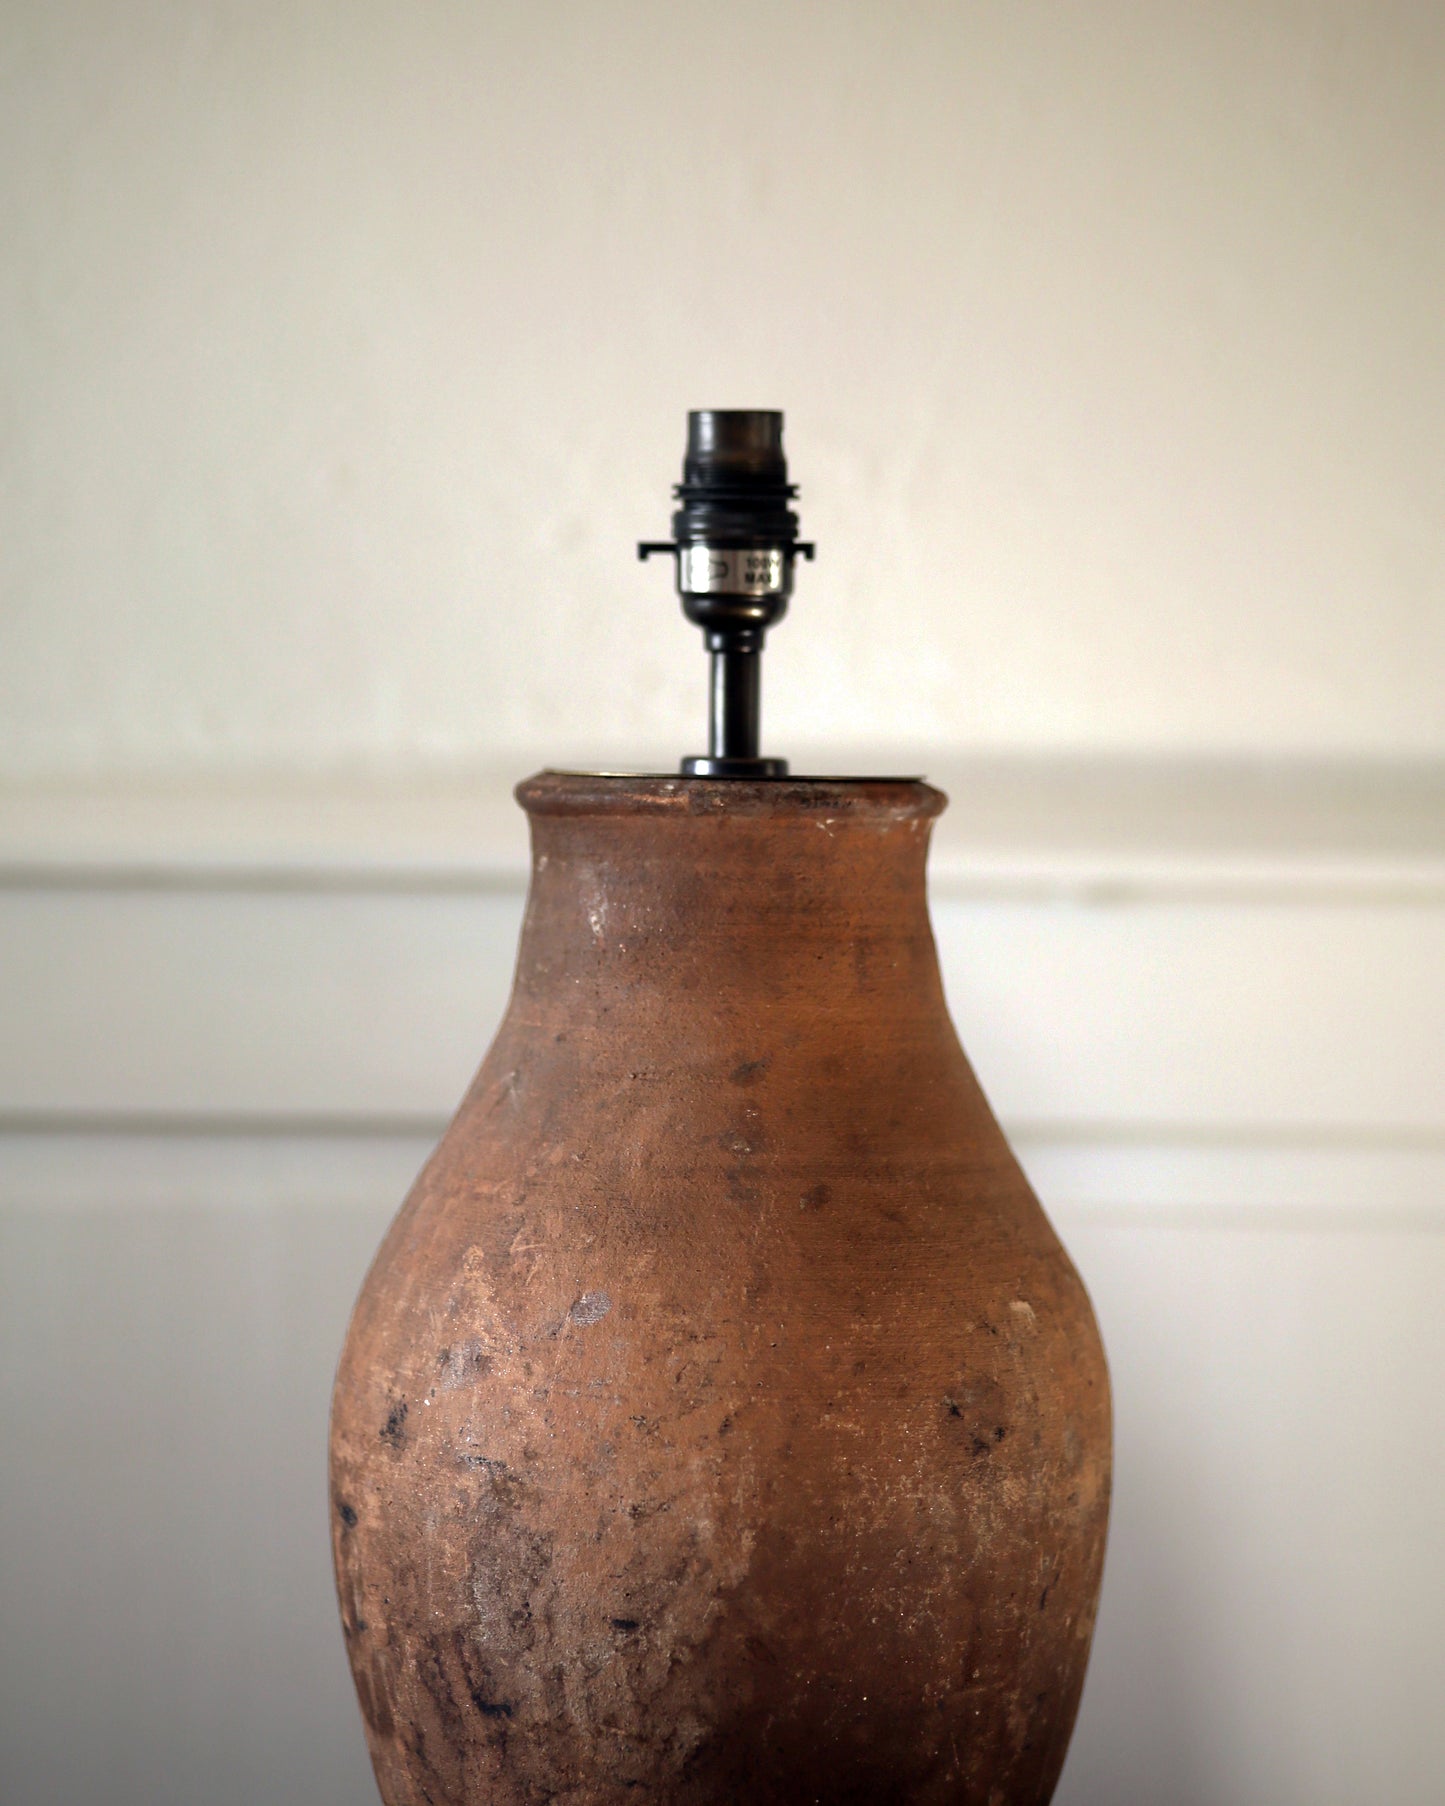 Authentic aged patina on terracotta pot table lamp base